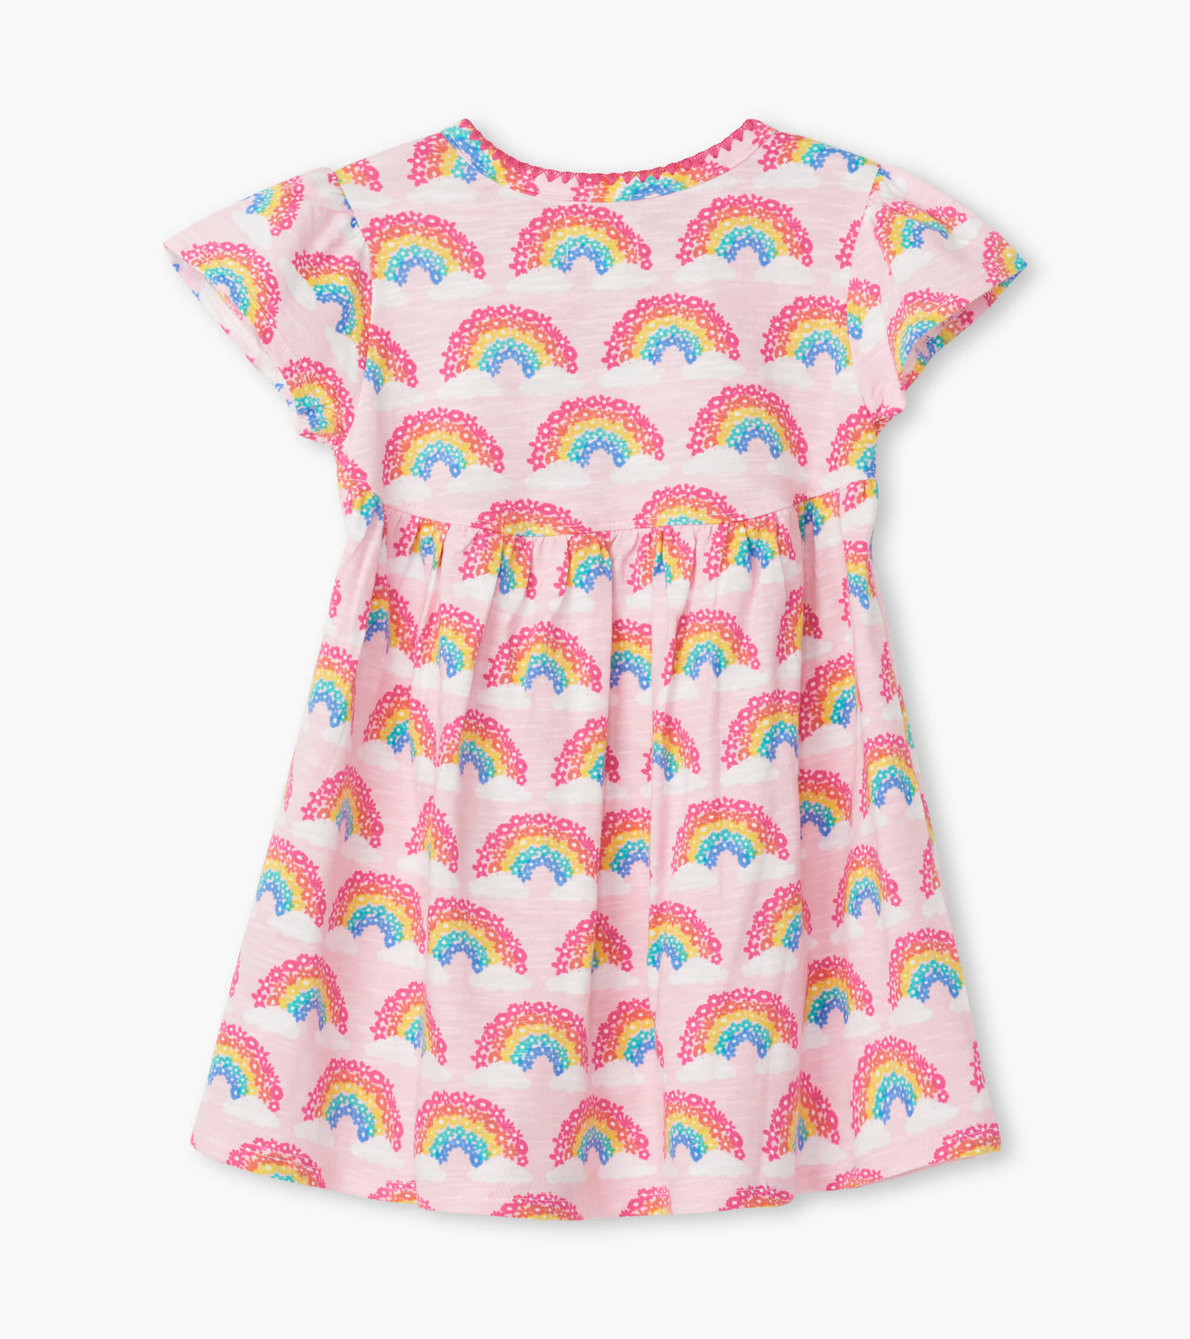 View larger image of Magical Rainbows Baby Puff Dress